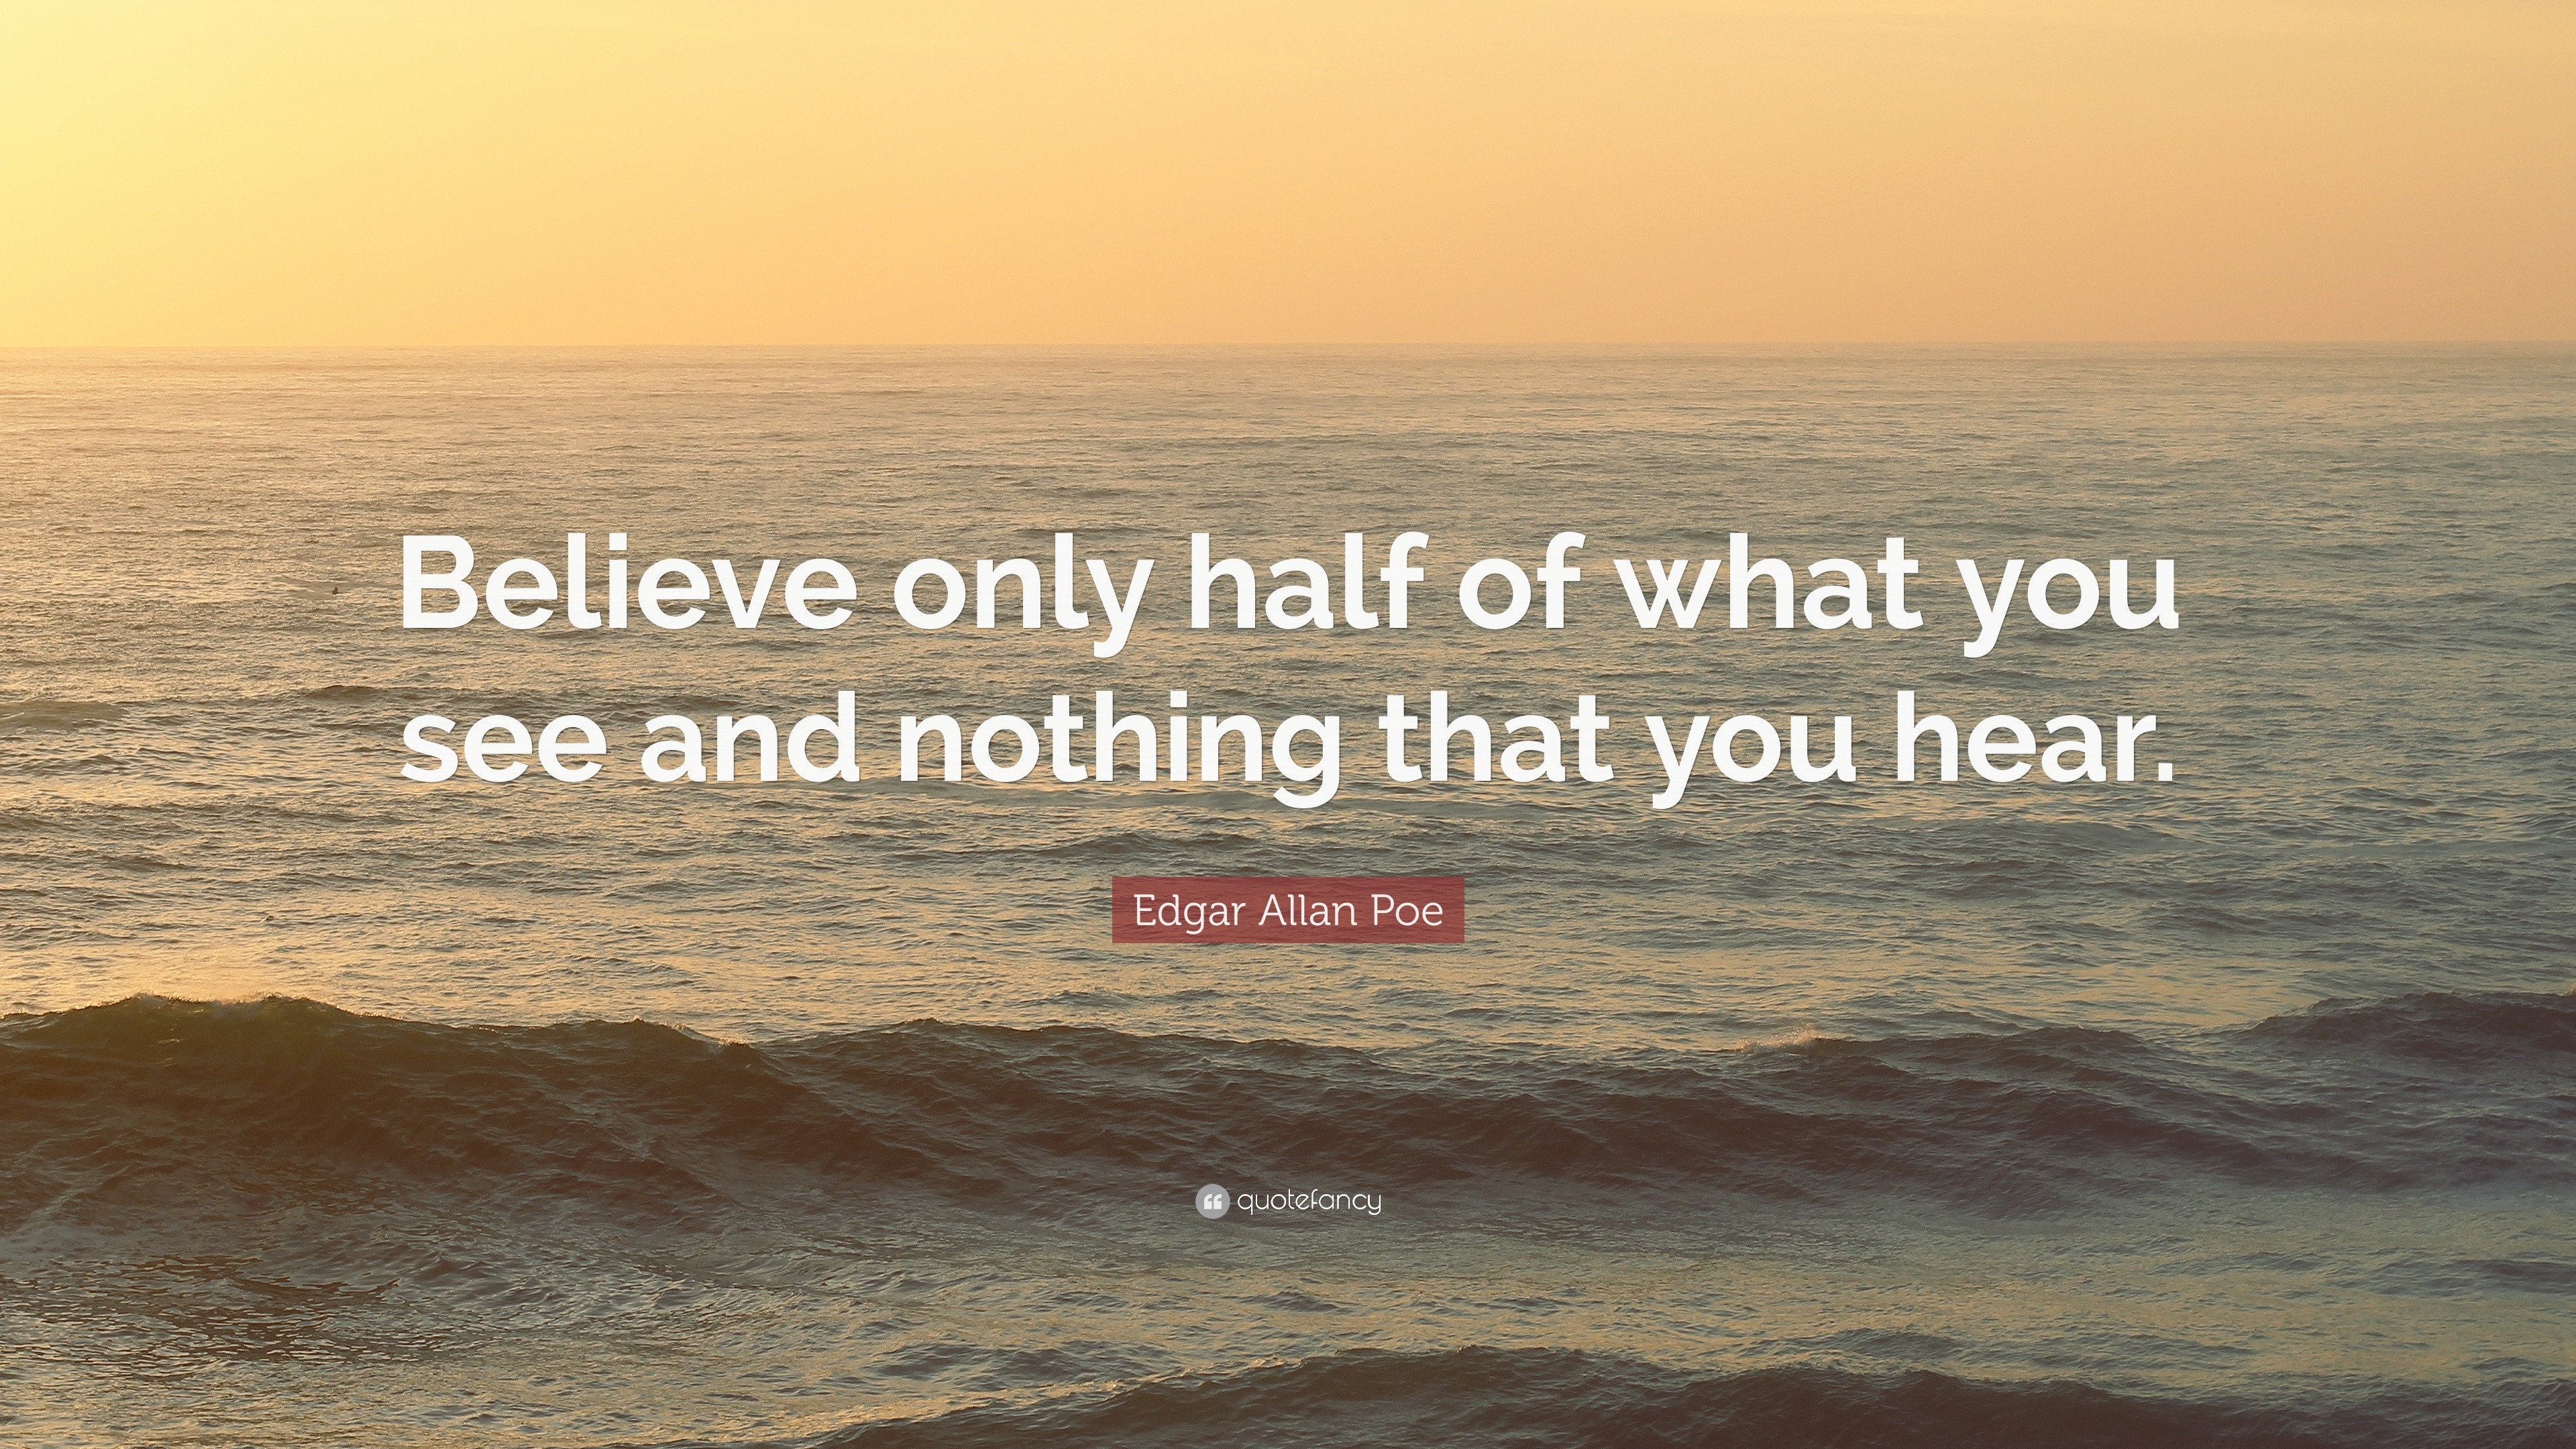 Edgar Allan Poe Quote: “Believe only half of what you see and nothing